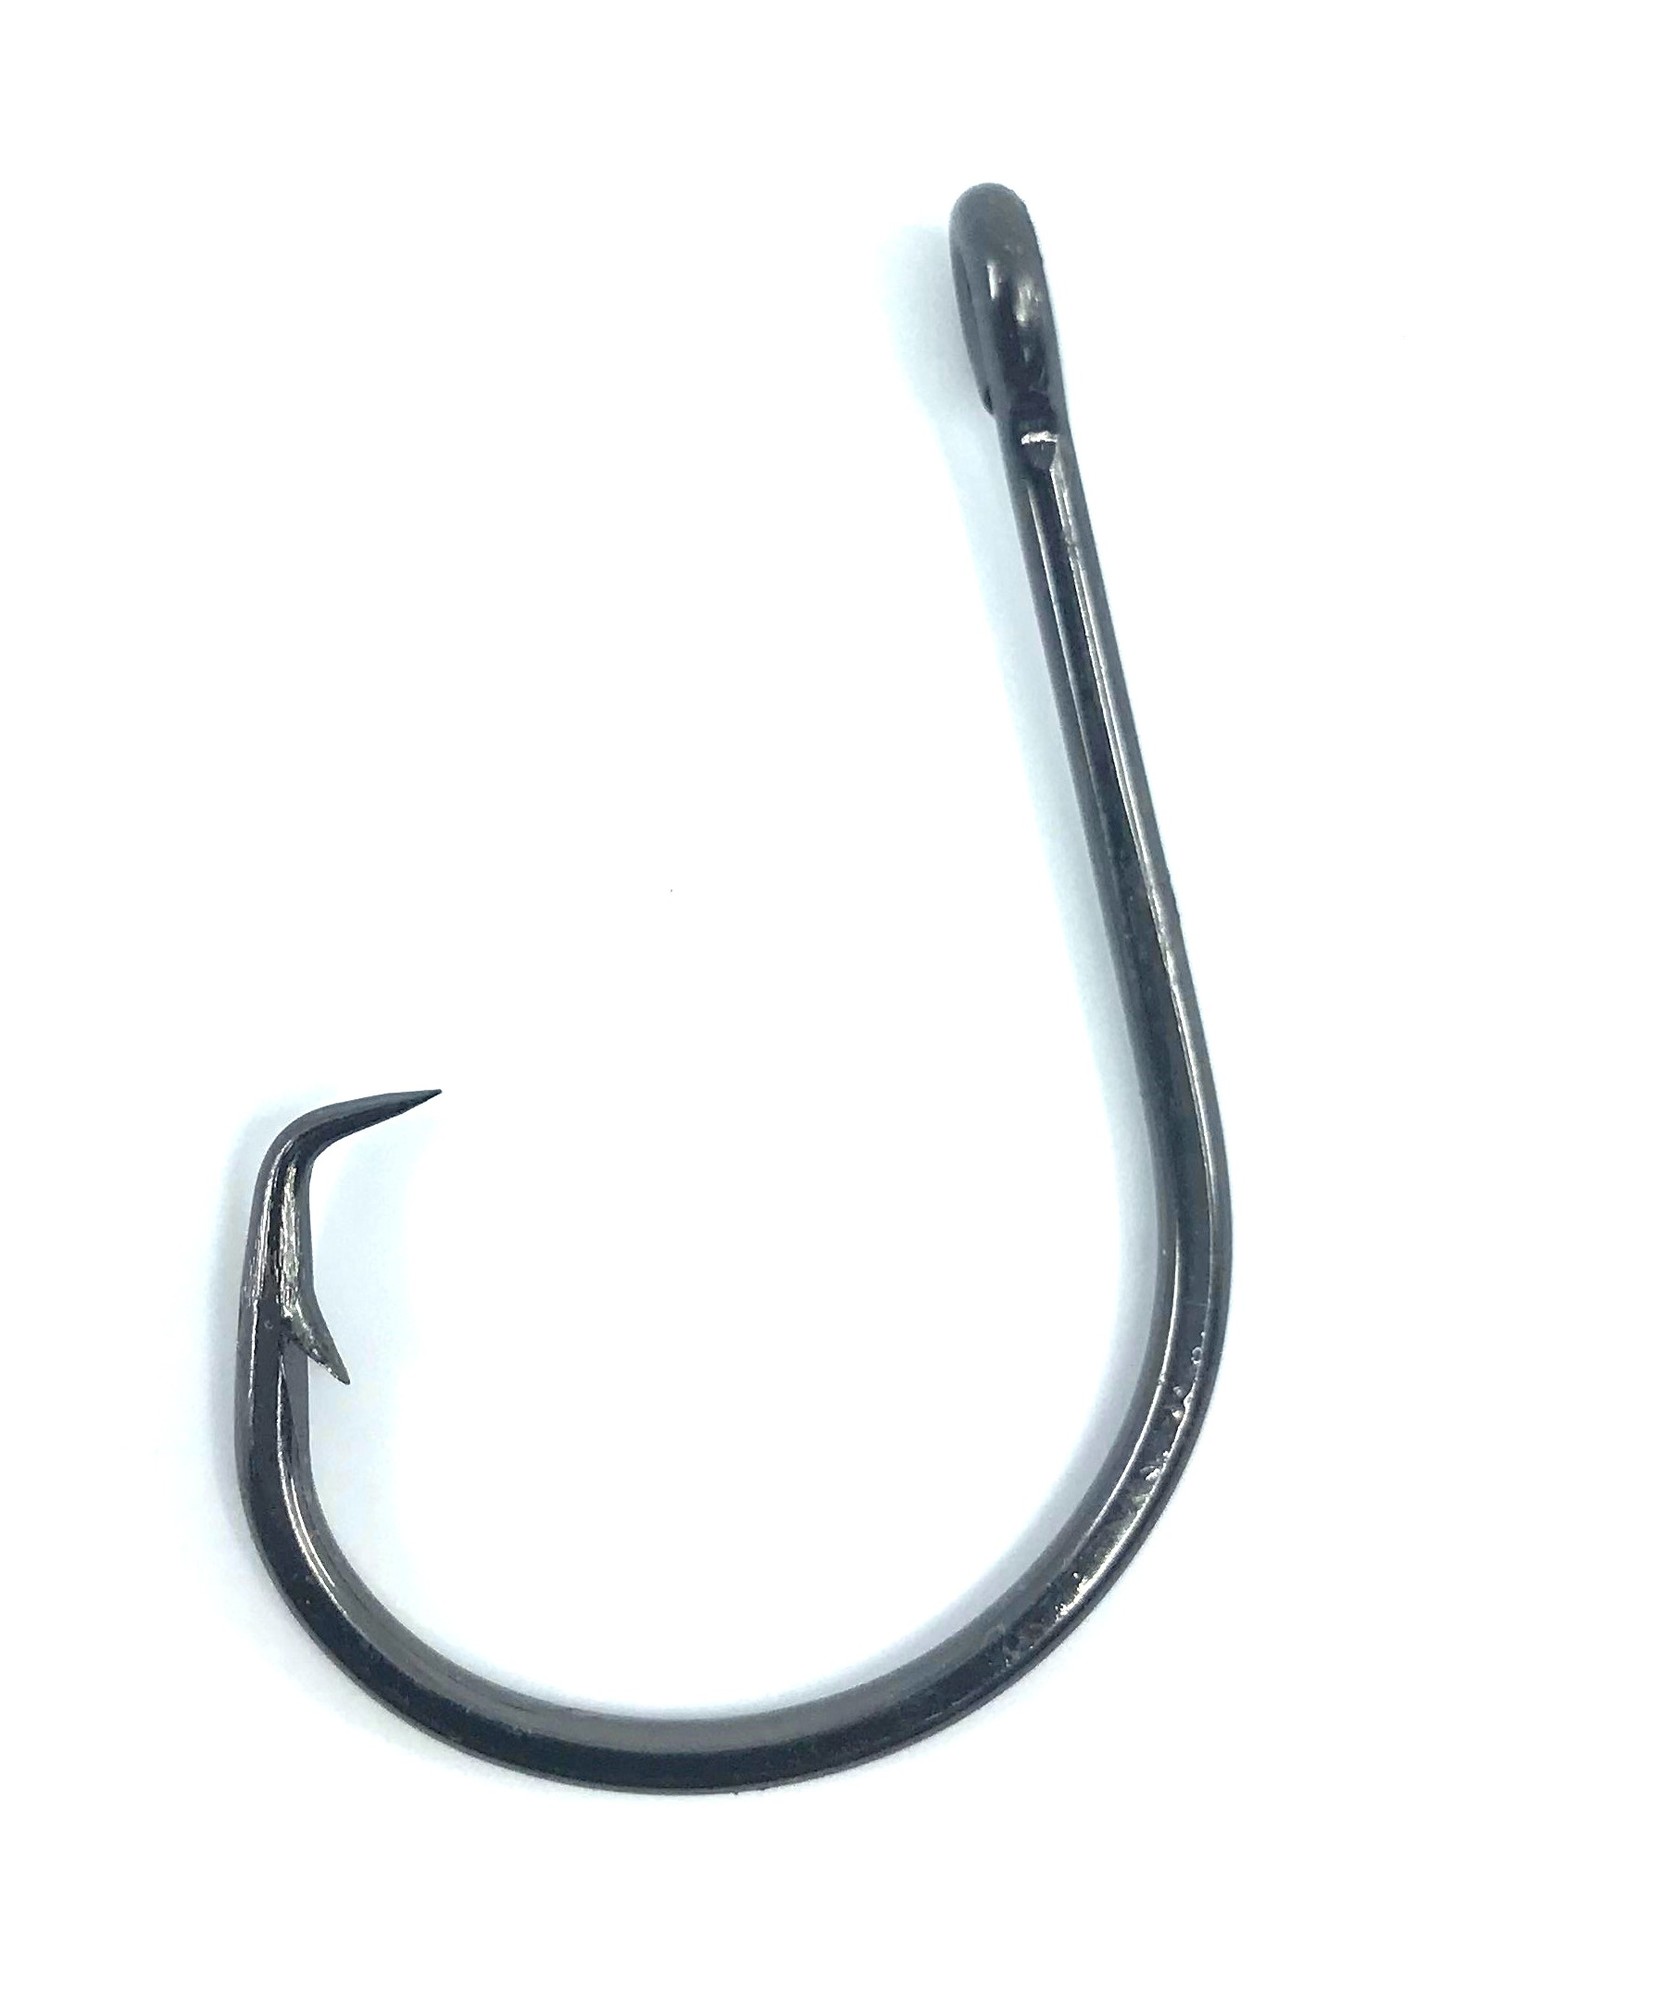 Mustad Classic Beak Hook, Forged, 2 Slices in Special Long Shank, Offset,  Down Eye , Up to 31% Off — CampSaver